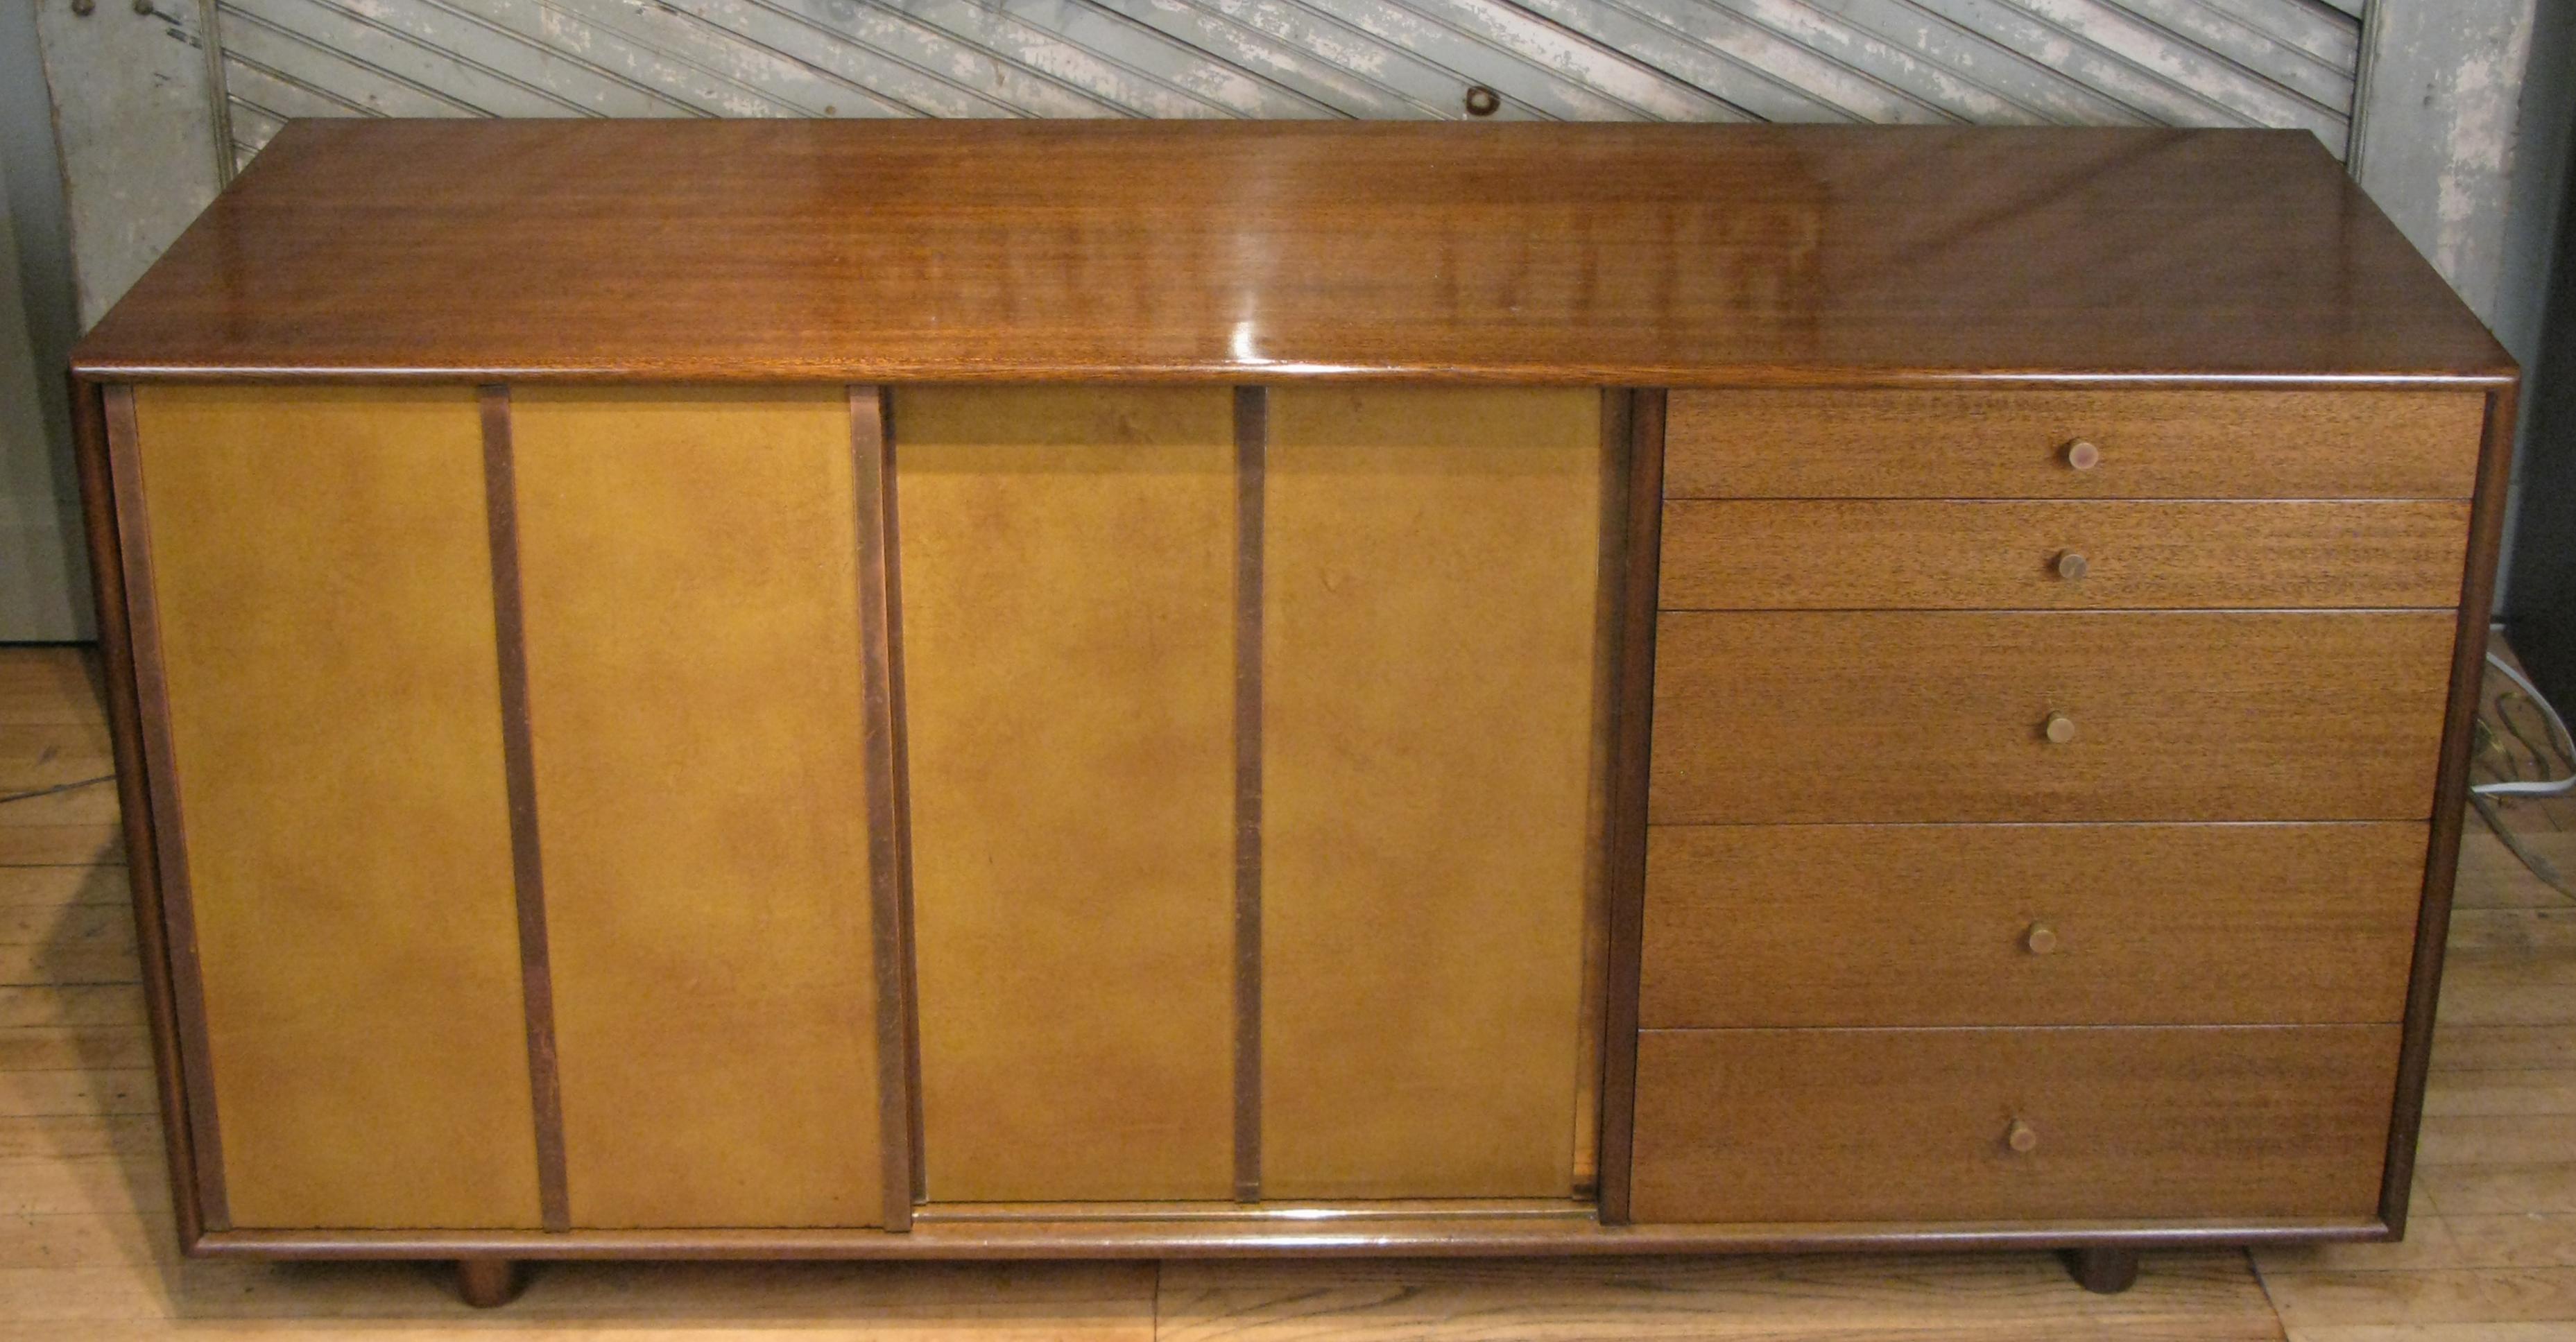 A very handsome 1950s cabinet chest designed by Harvey Probber, with a mahogany case and sliding leather doors covered in leather and brass trim. The sliding doors conceal shelves on the left and slide out mahogany trays on the right. The right side